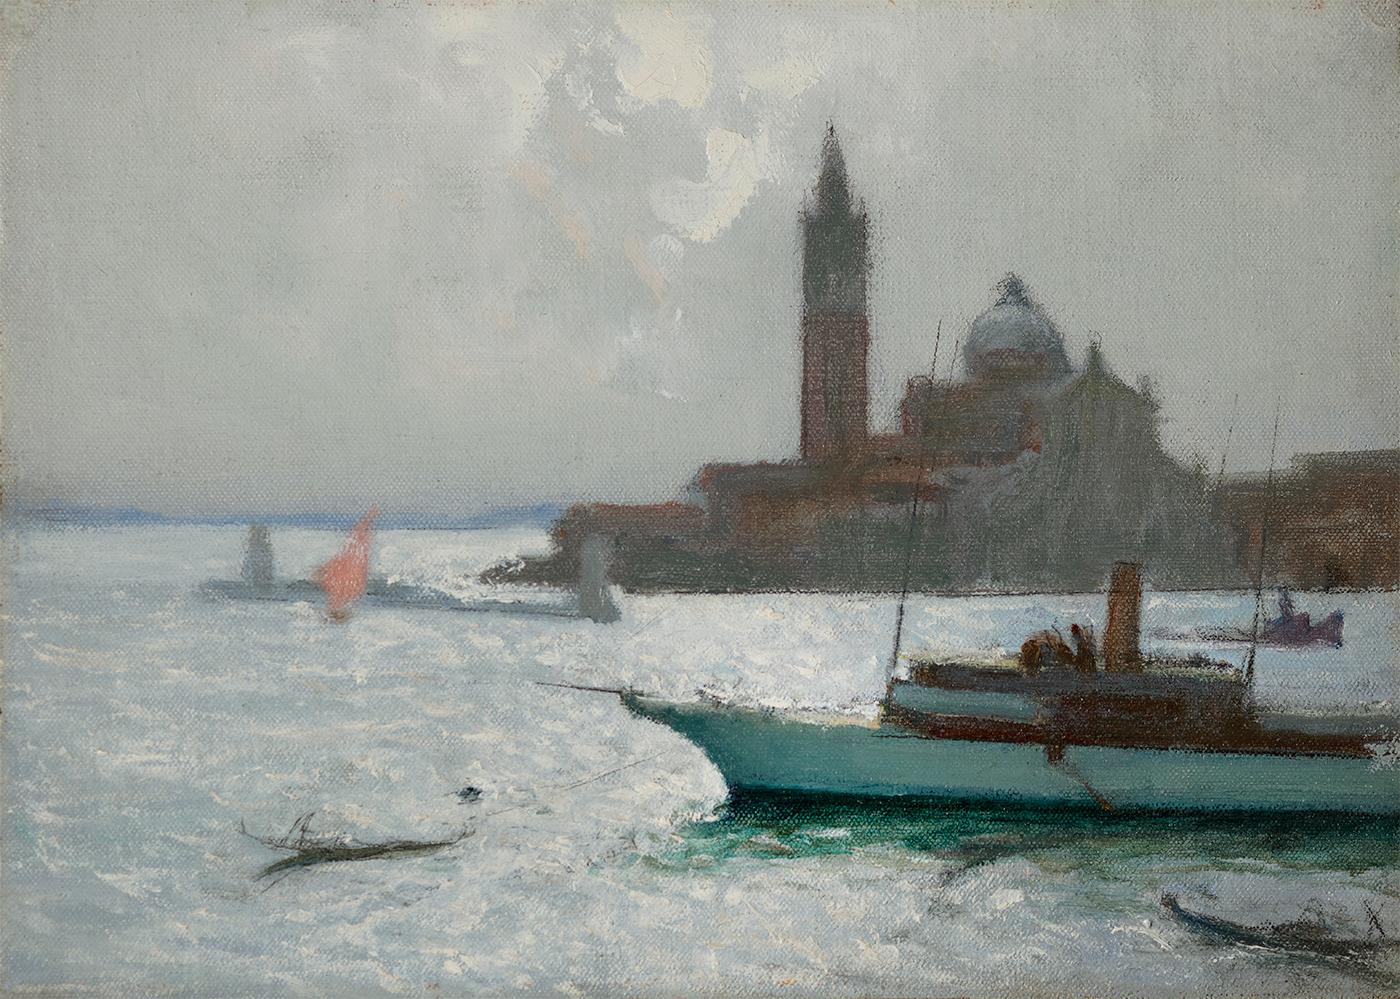 The Lagoon, Venice - Painting by Charles Hoffbauer